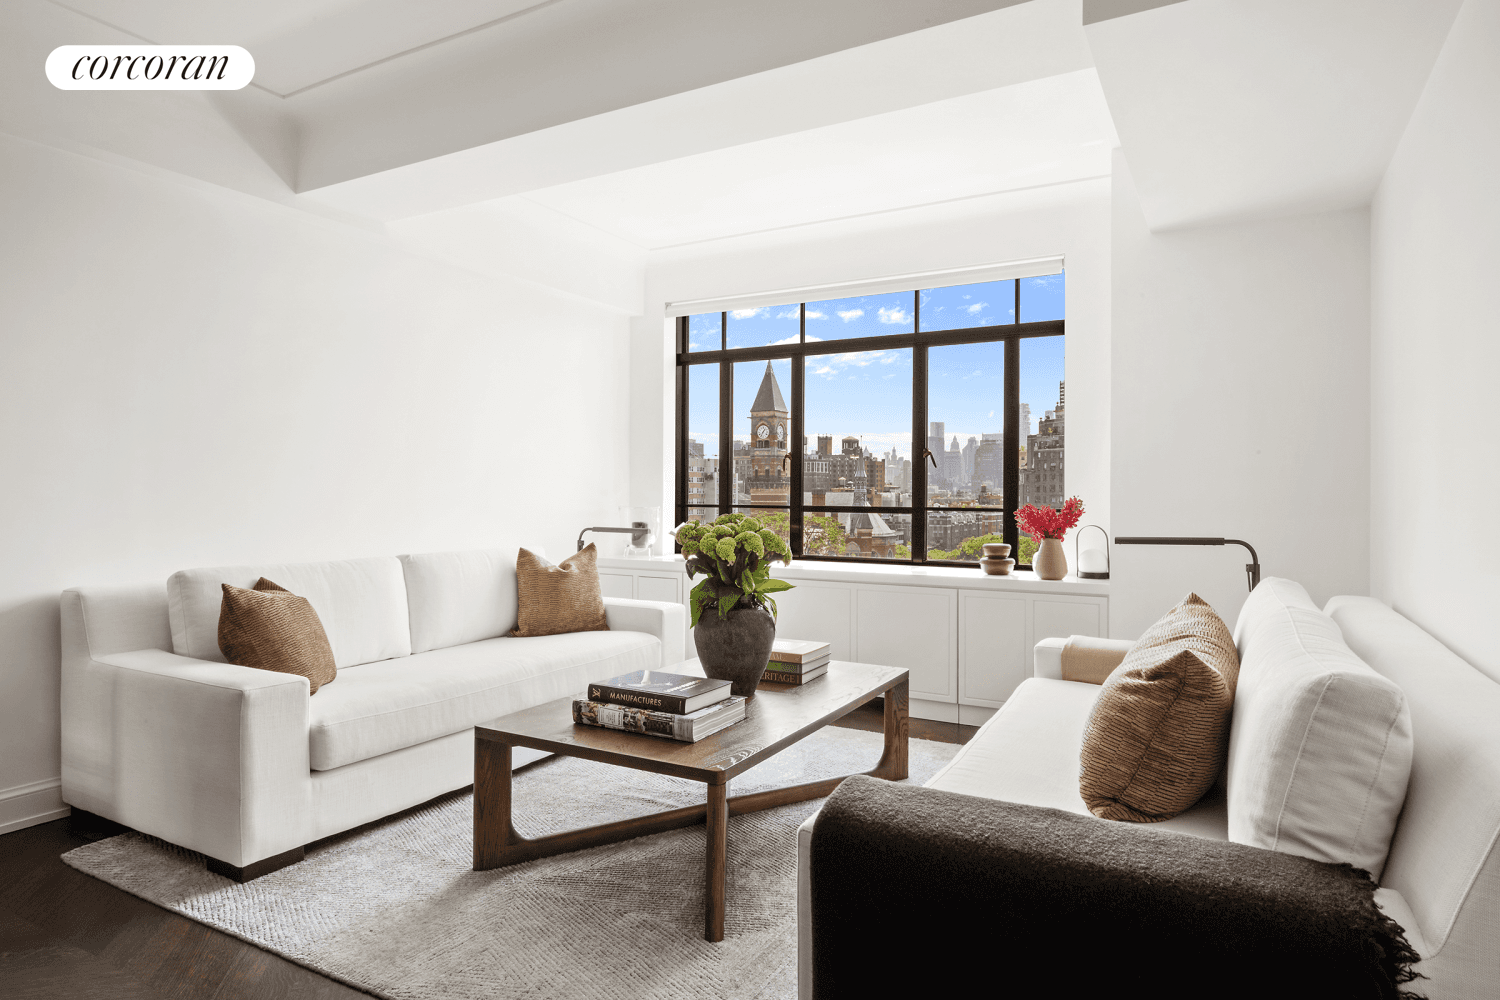 Floating high above Greenwich Village in downtown's premier condominium, Greenwich Lane, this inviting and meticulous 1 bedroom and 1 bath home offers unobstructed views south to the Freedom Tower.